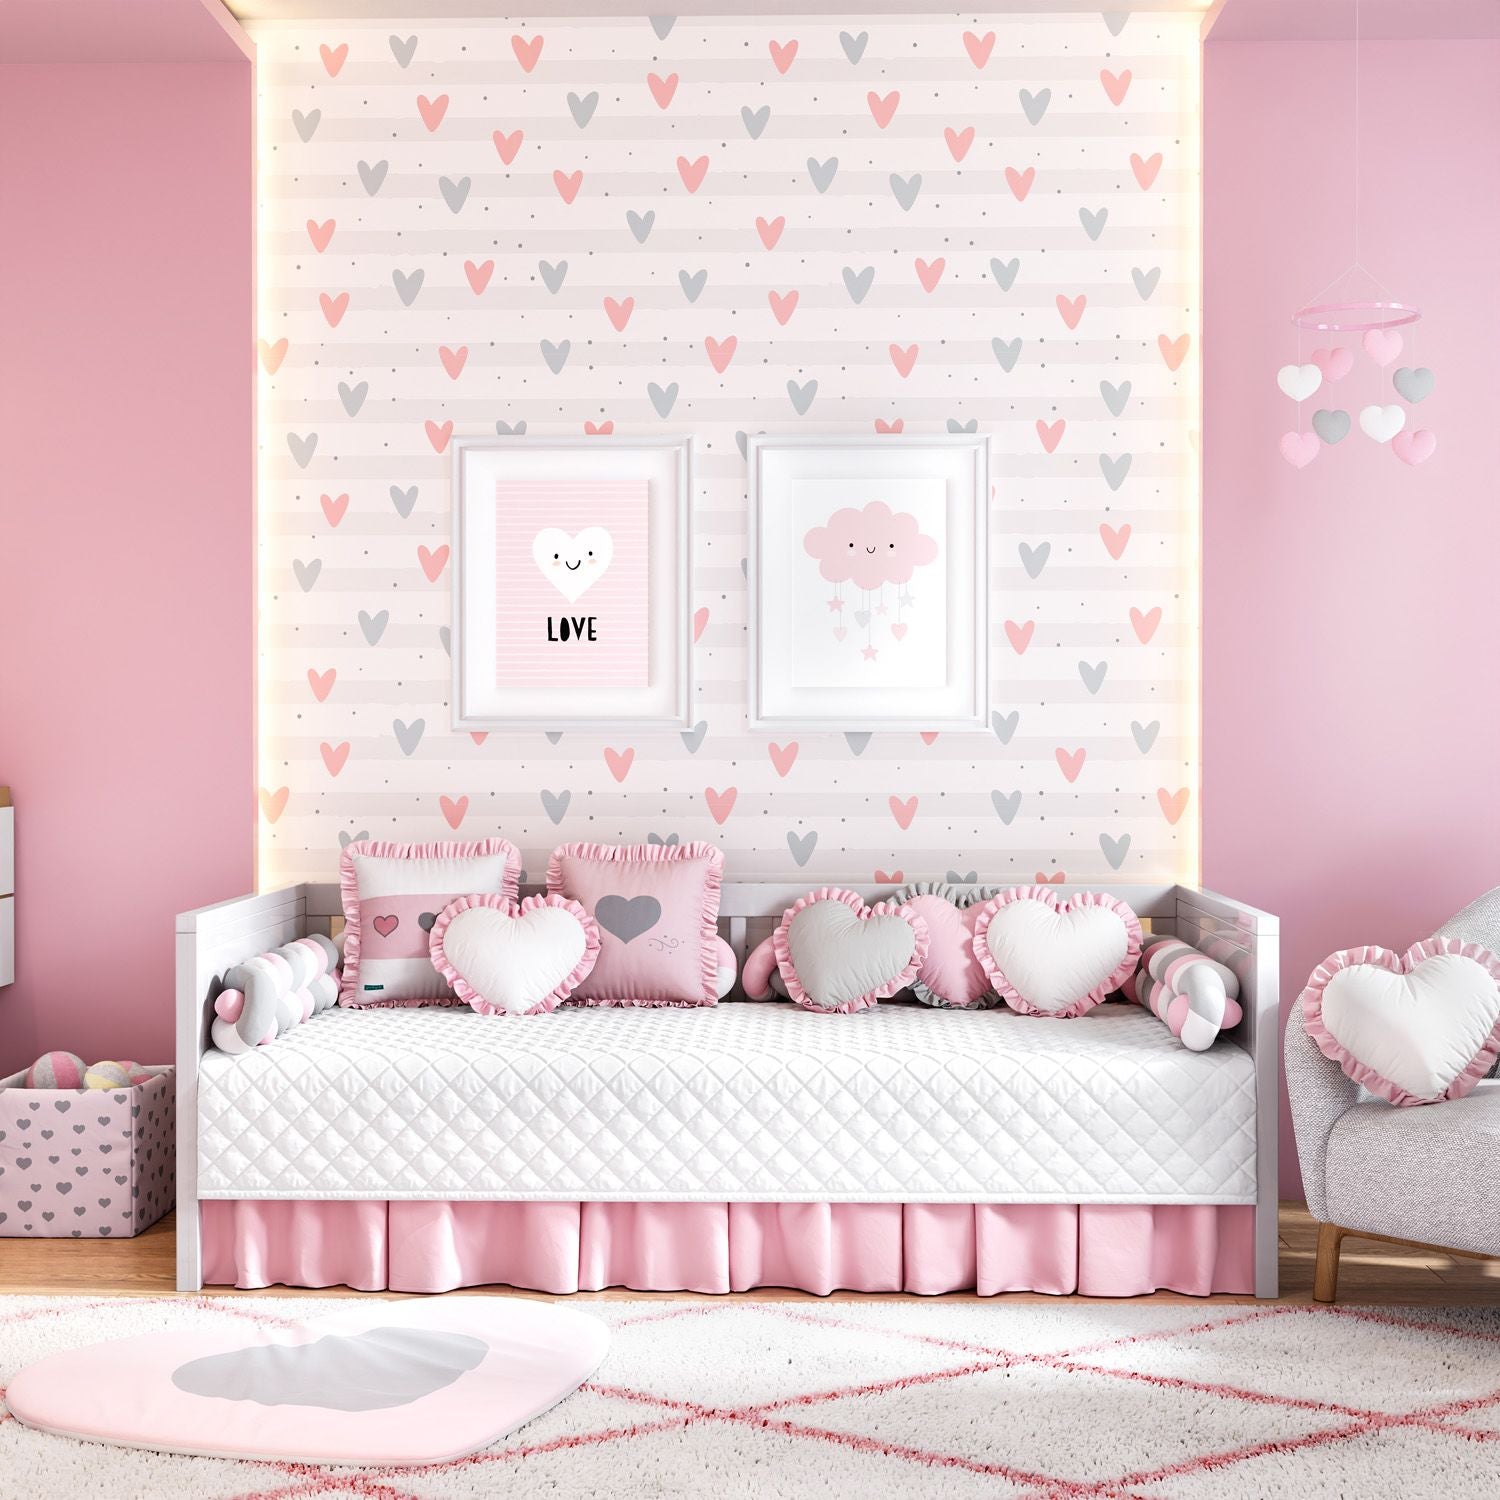 6 Piece Pink Heart Daybed Bedding Set